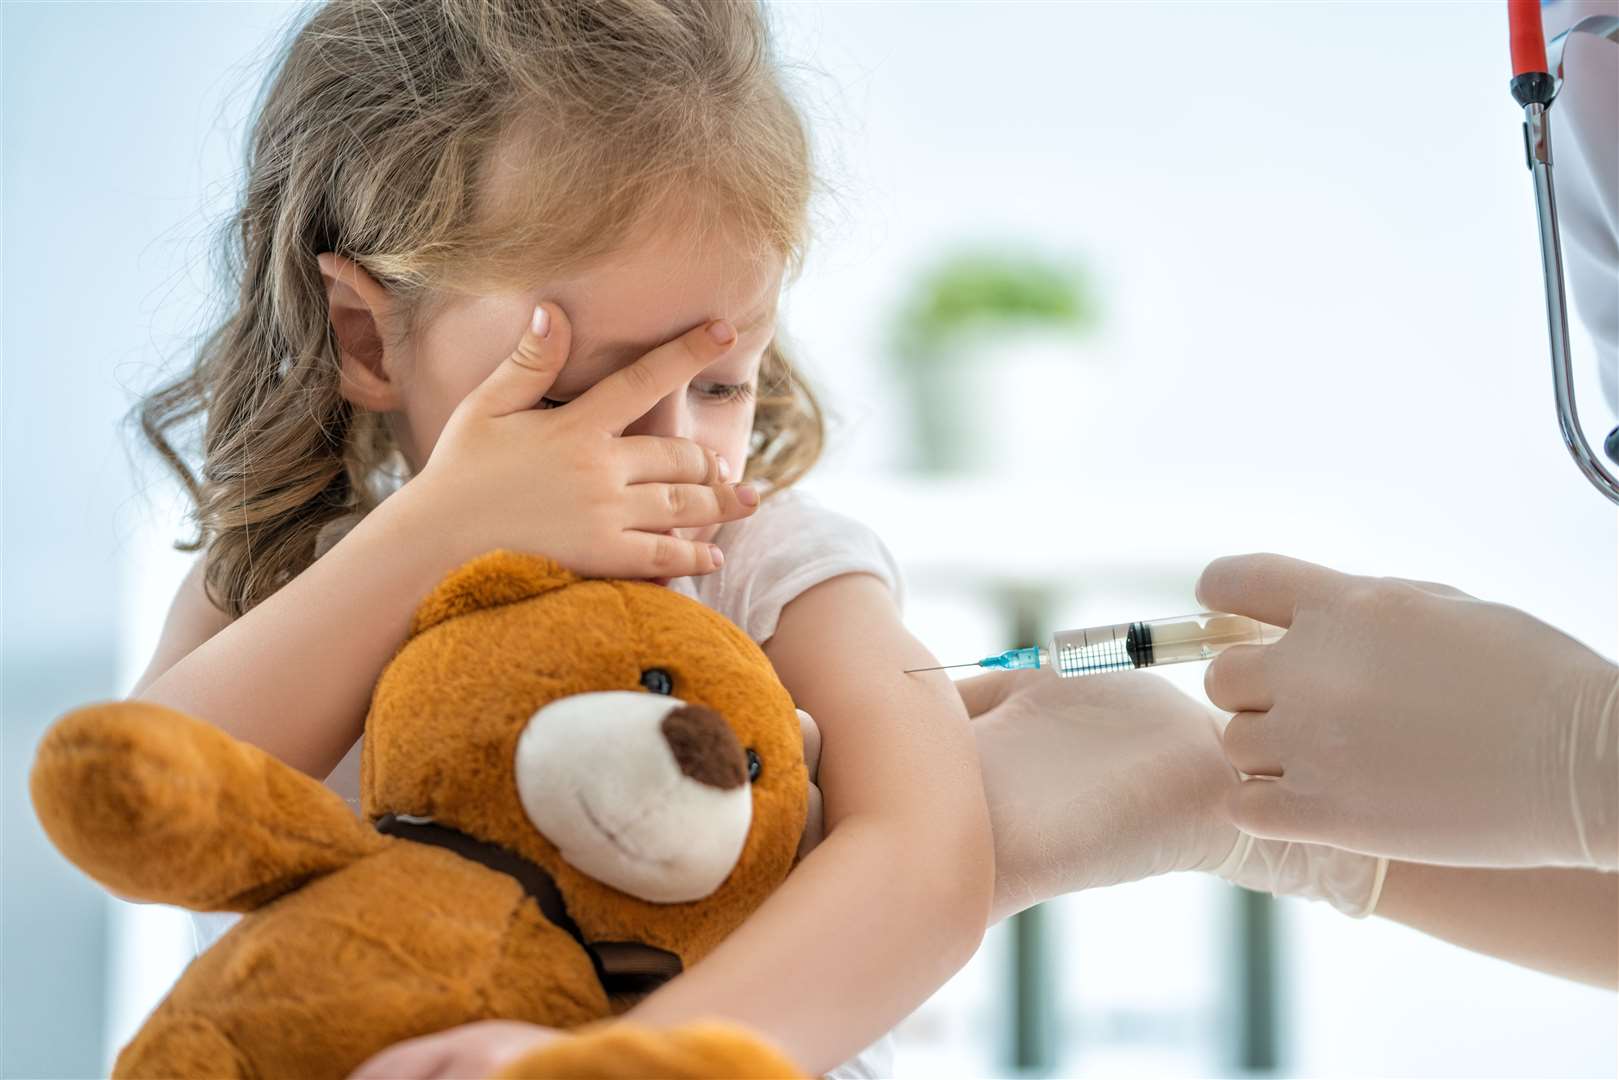 Vaccine uptake rates among children have dipped in the past year according to recent figures. (Picture: Stock image)